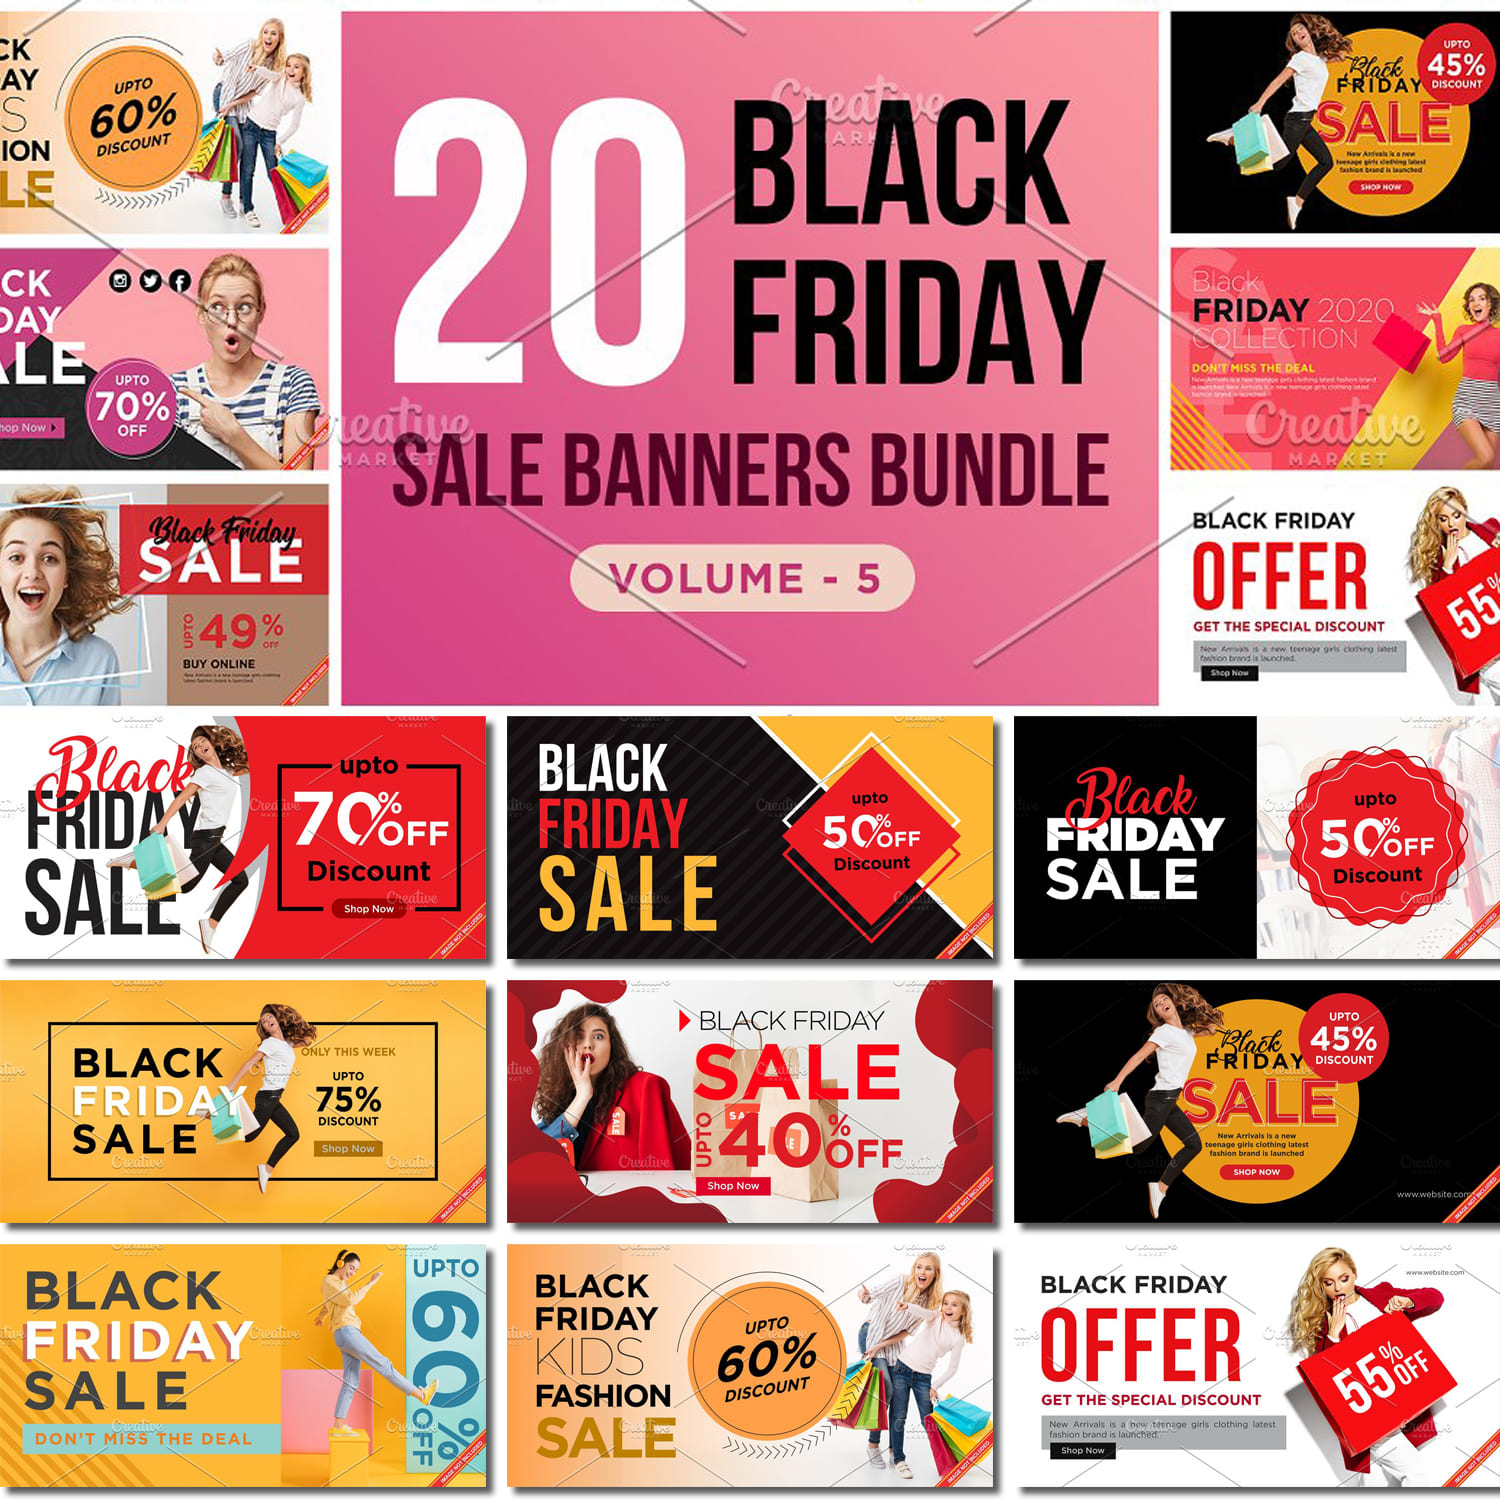 Black Friday Sale Banners V.5 created by Shahsoft.